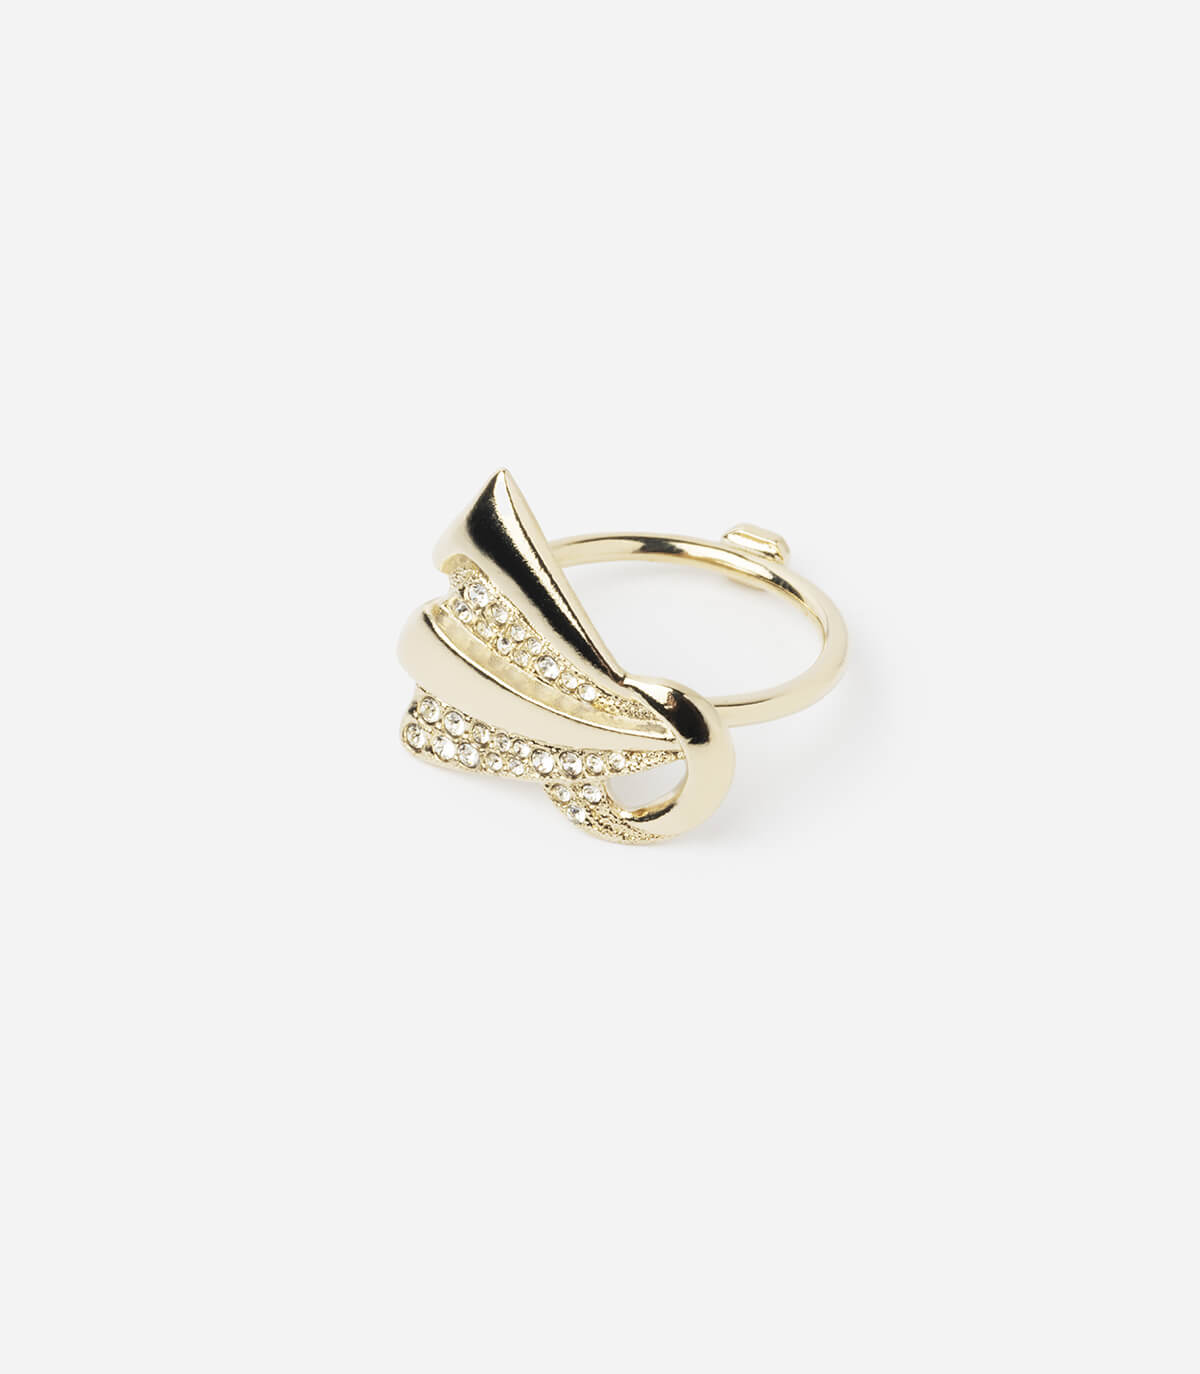 SNOTRA HALF-BOW RING - Bague - Delphine-Charlotte Parmentier